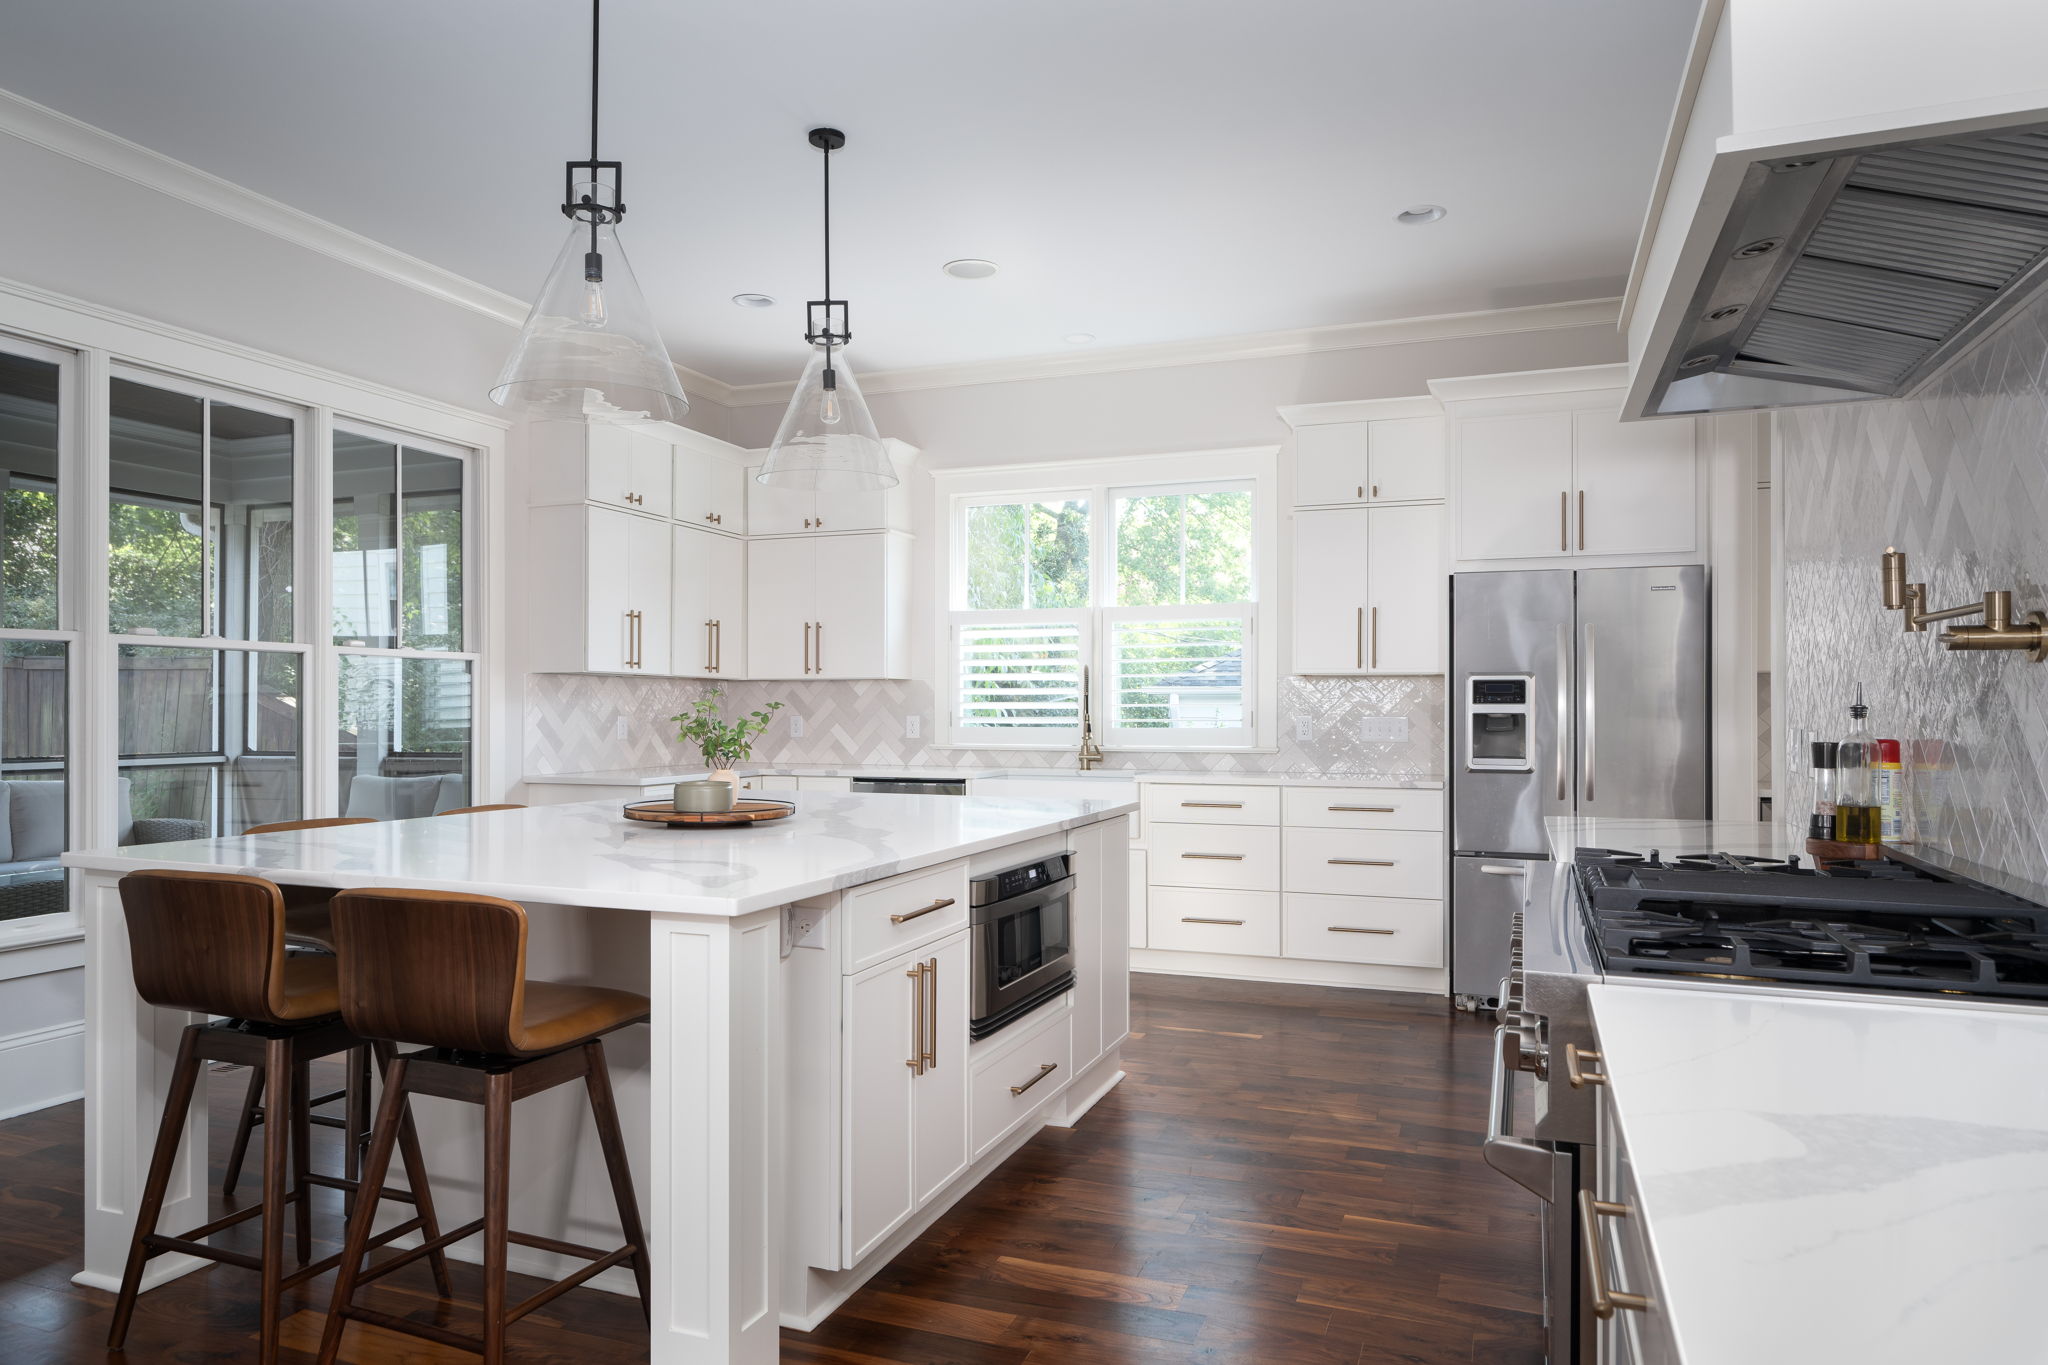 Modern kitchen with white cabinetry, stainless steel appliances, and a central island with bar stools, ideal for home renovations with the best return on investment, surrounded by hardwood floors and natural light.